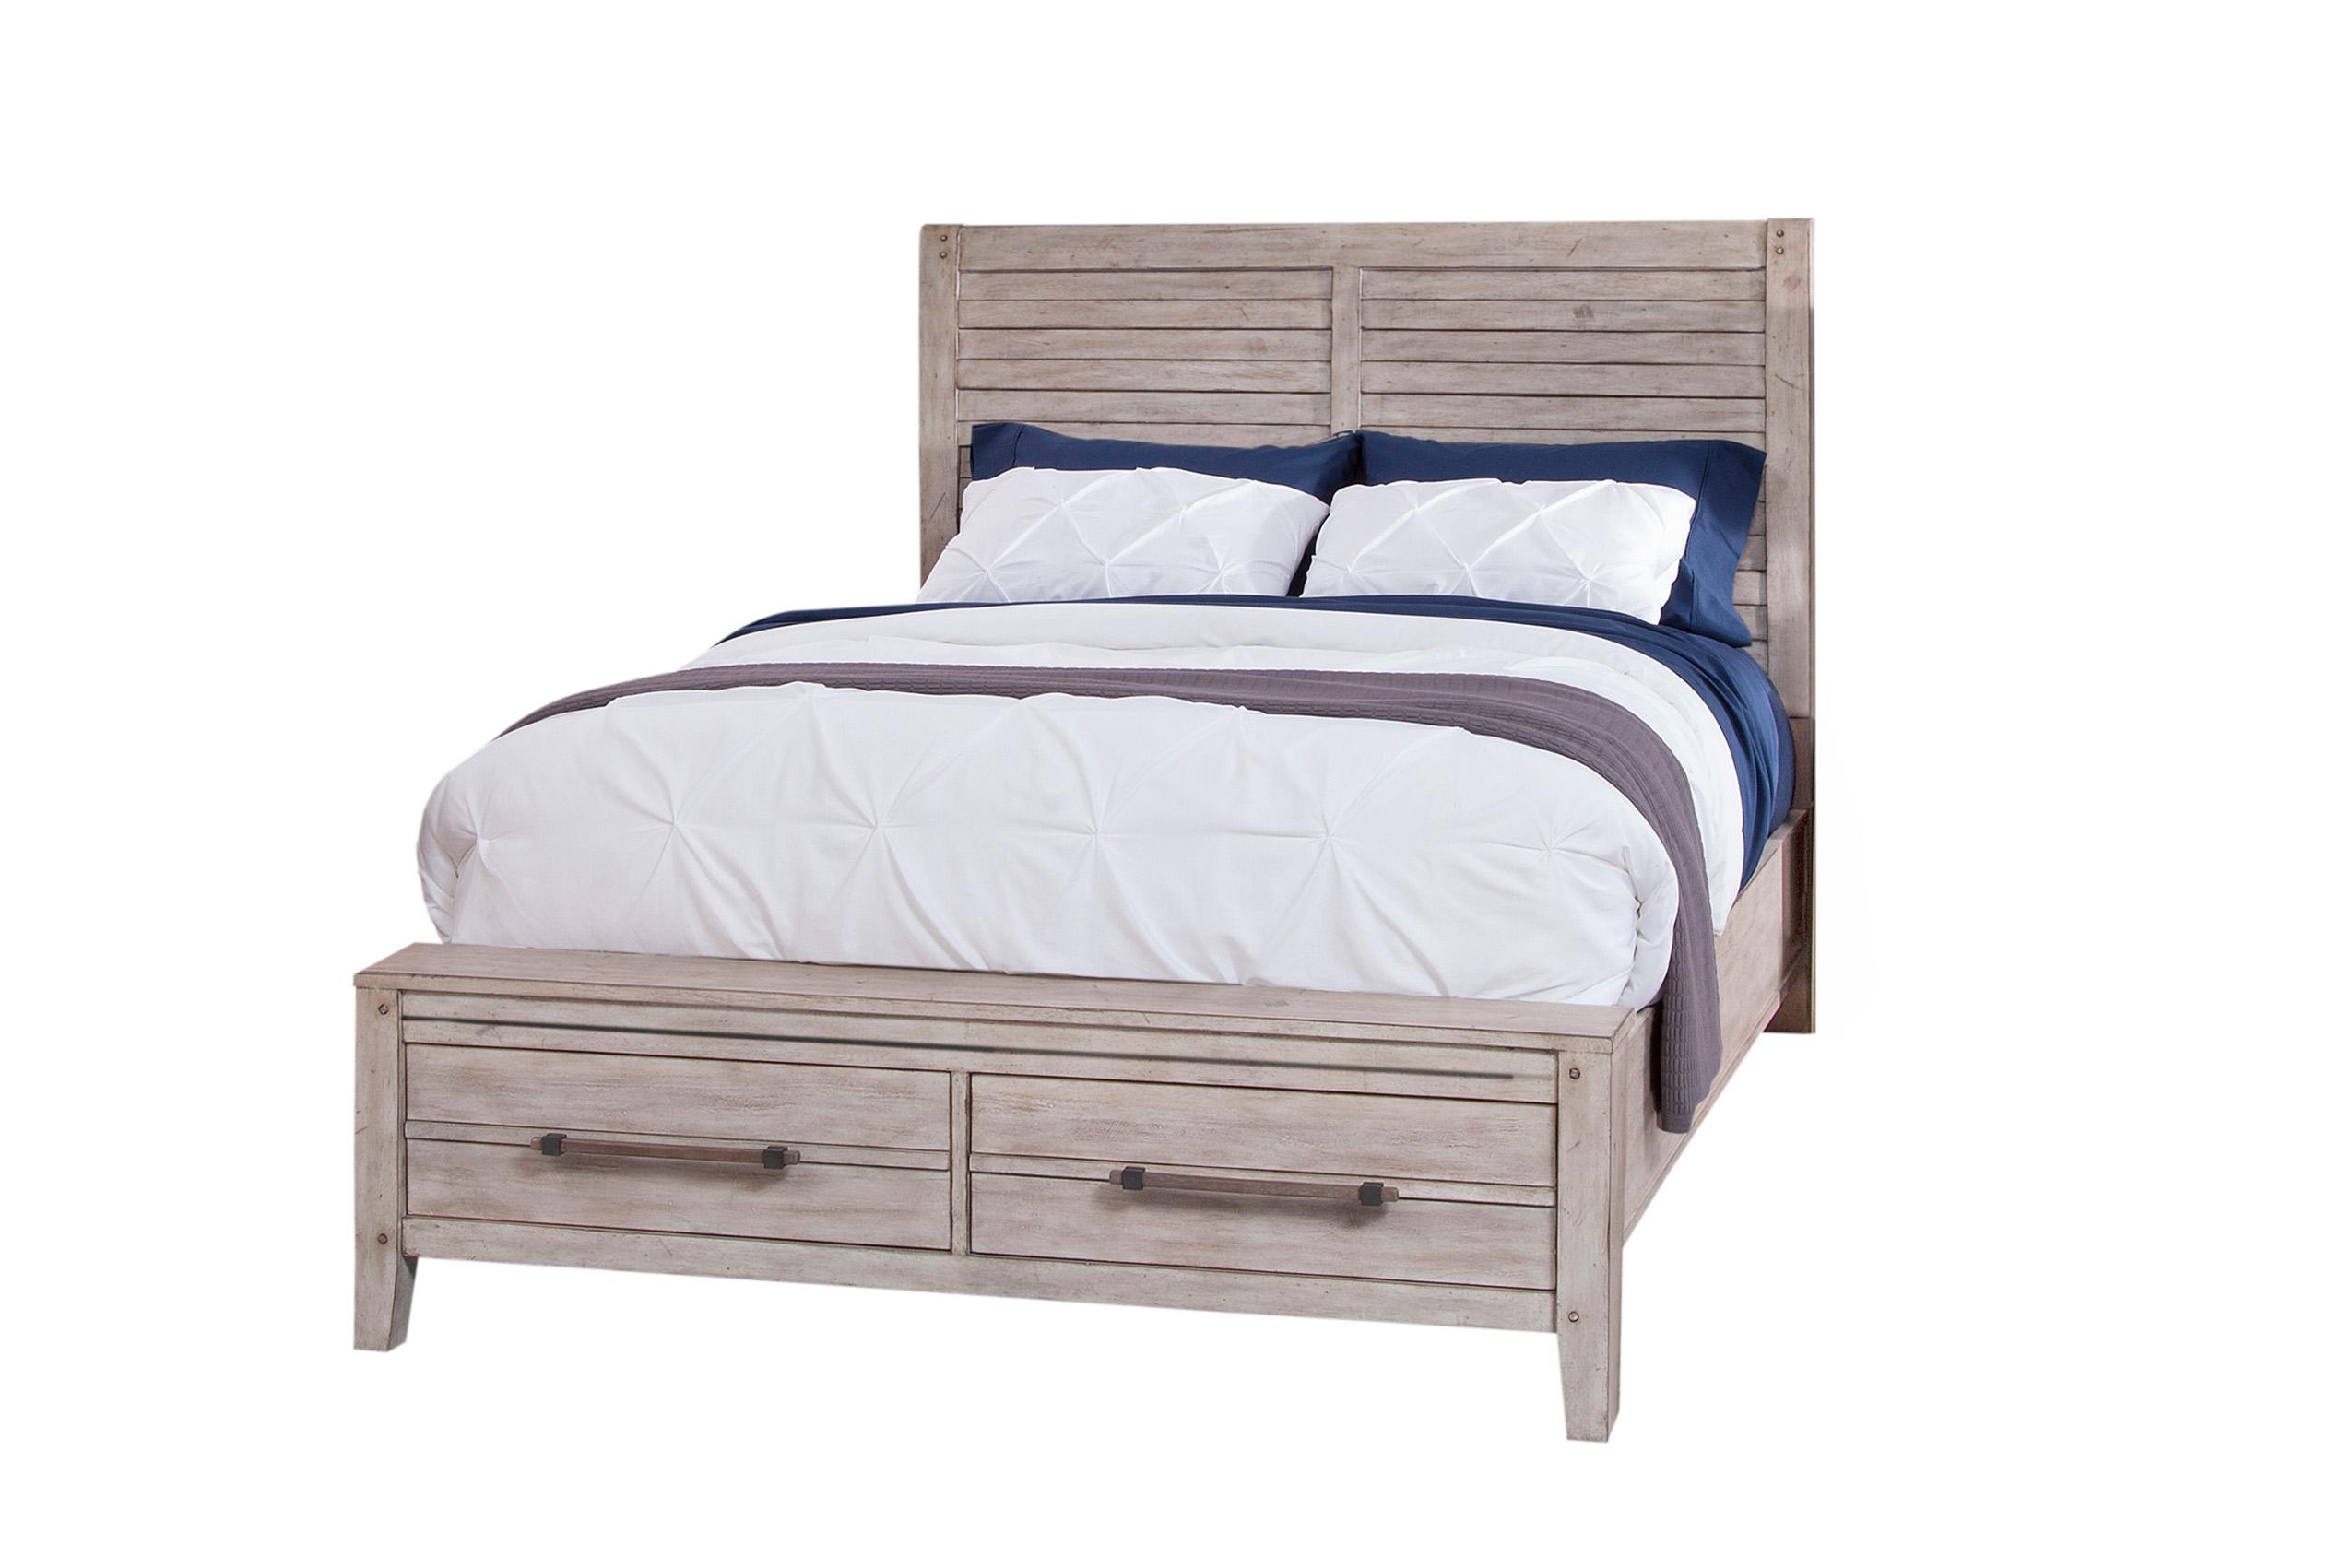 Classic, Traditional Panel Bed AURORA 2810-66PSB 2810-66PNST in whitewash 